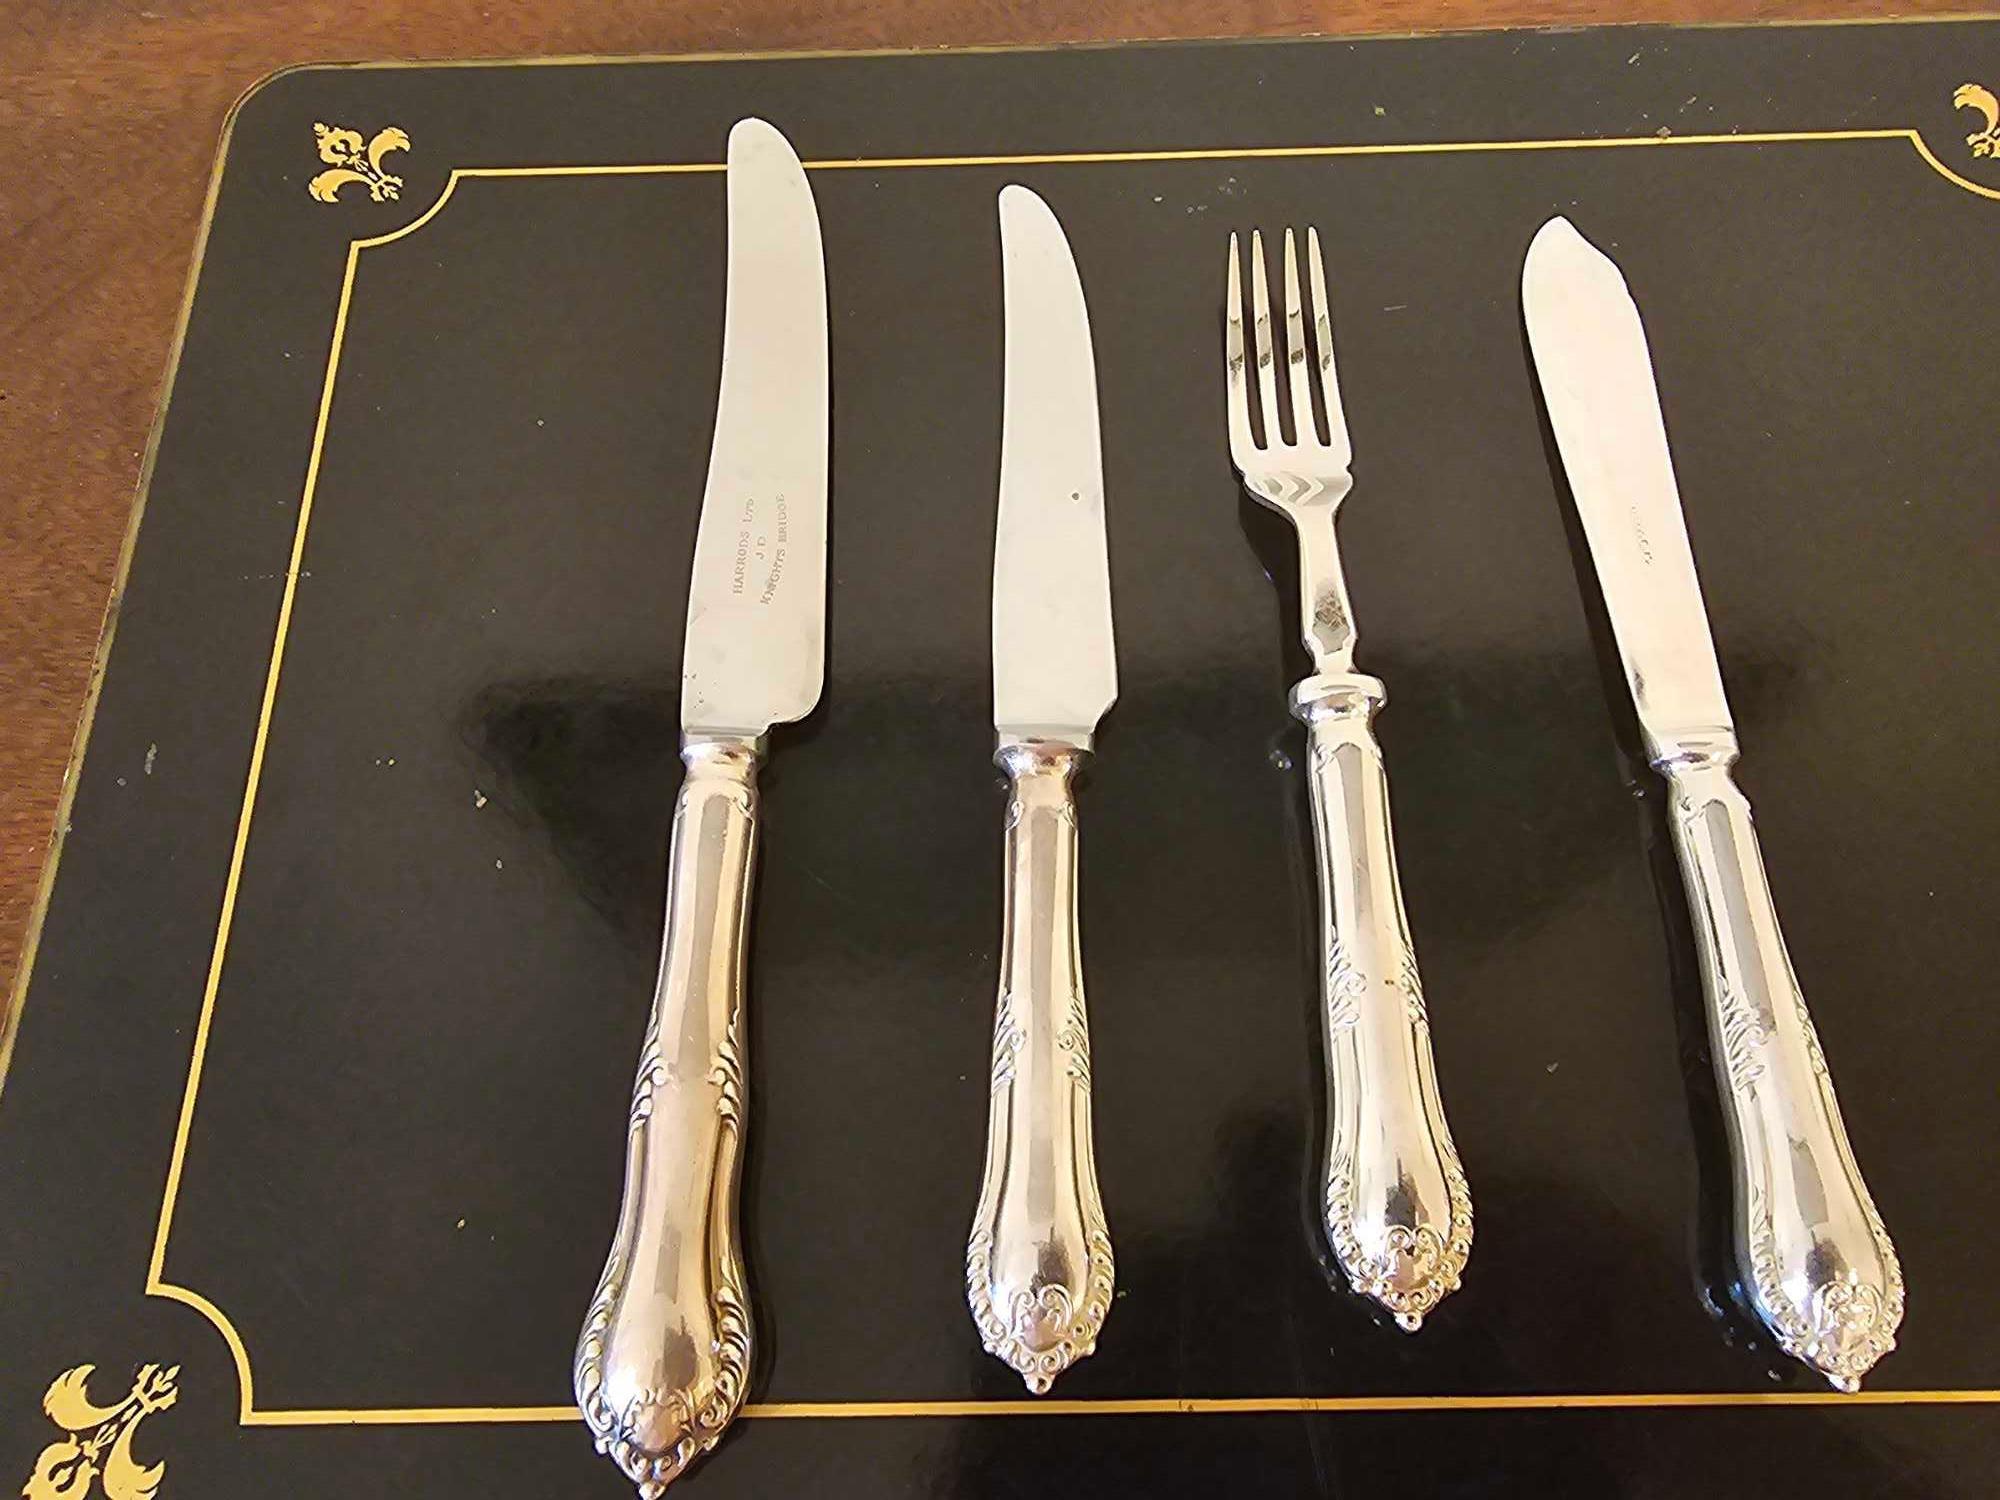 Silverplate Flatware By James Dixon For Harrods 50 Pieces Comprising Of 10 X Dinner Knives, 16 X - Image 2 of 3